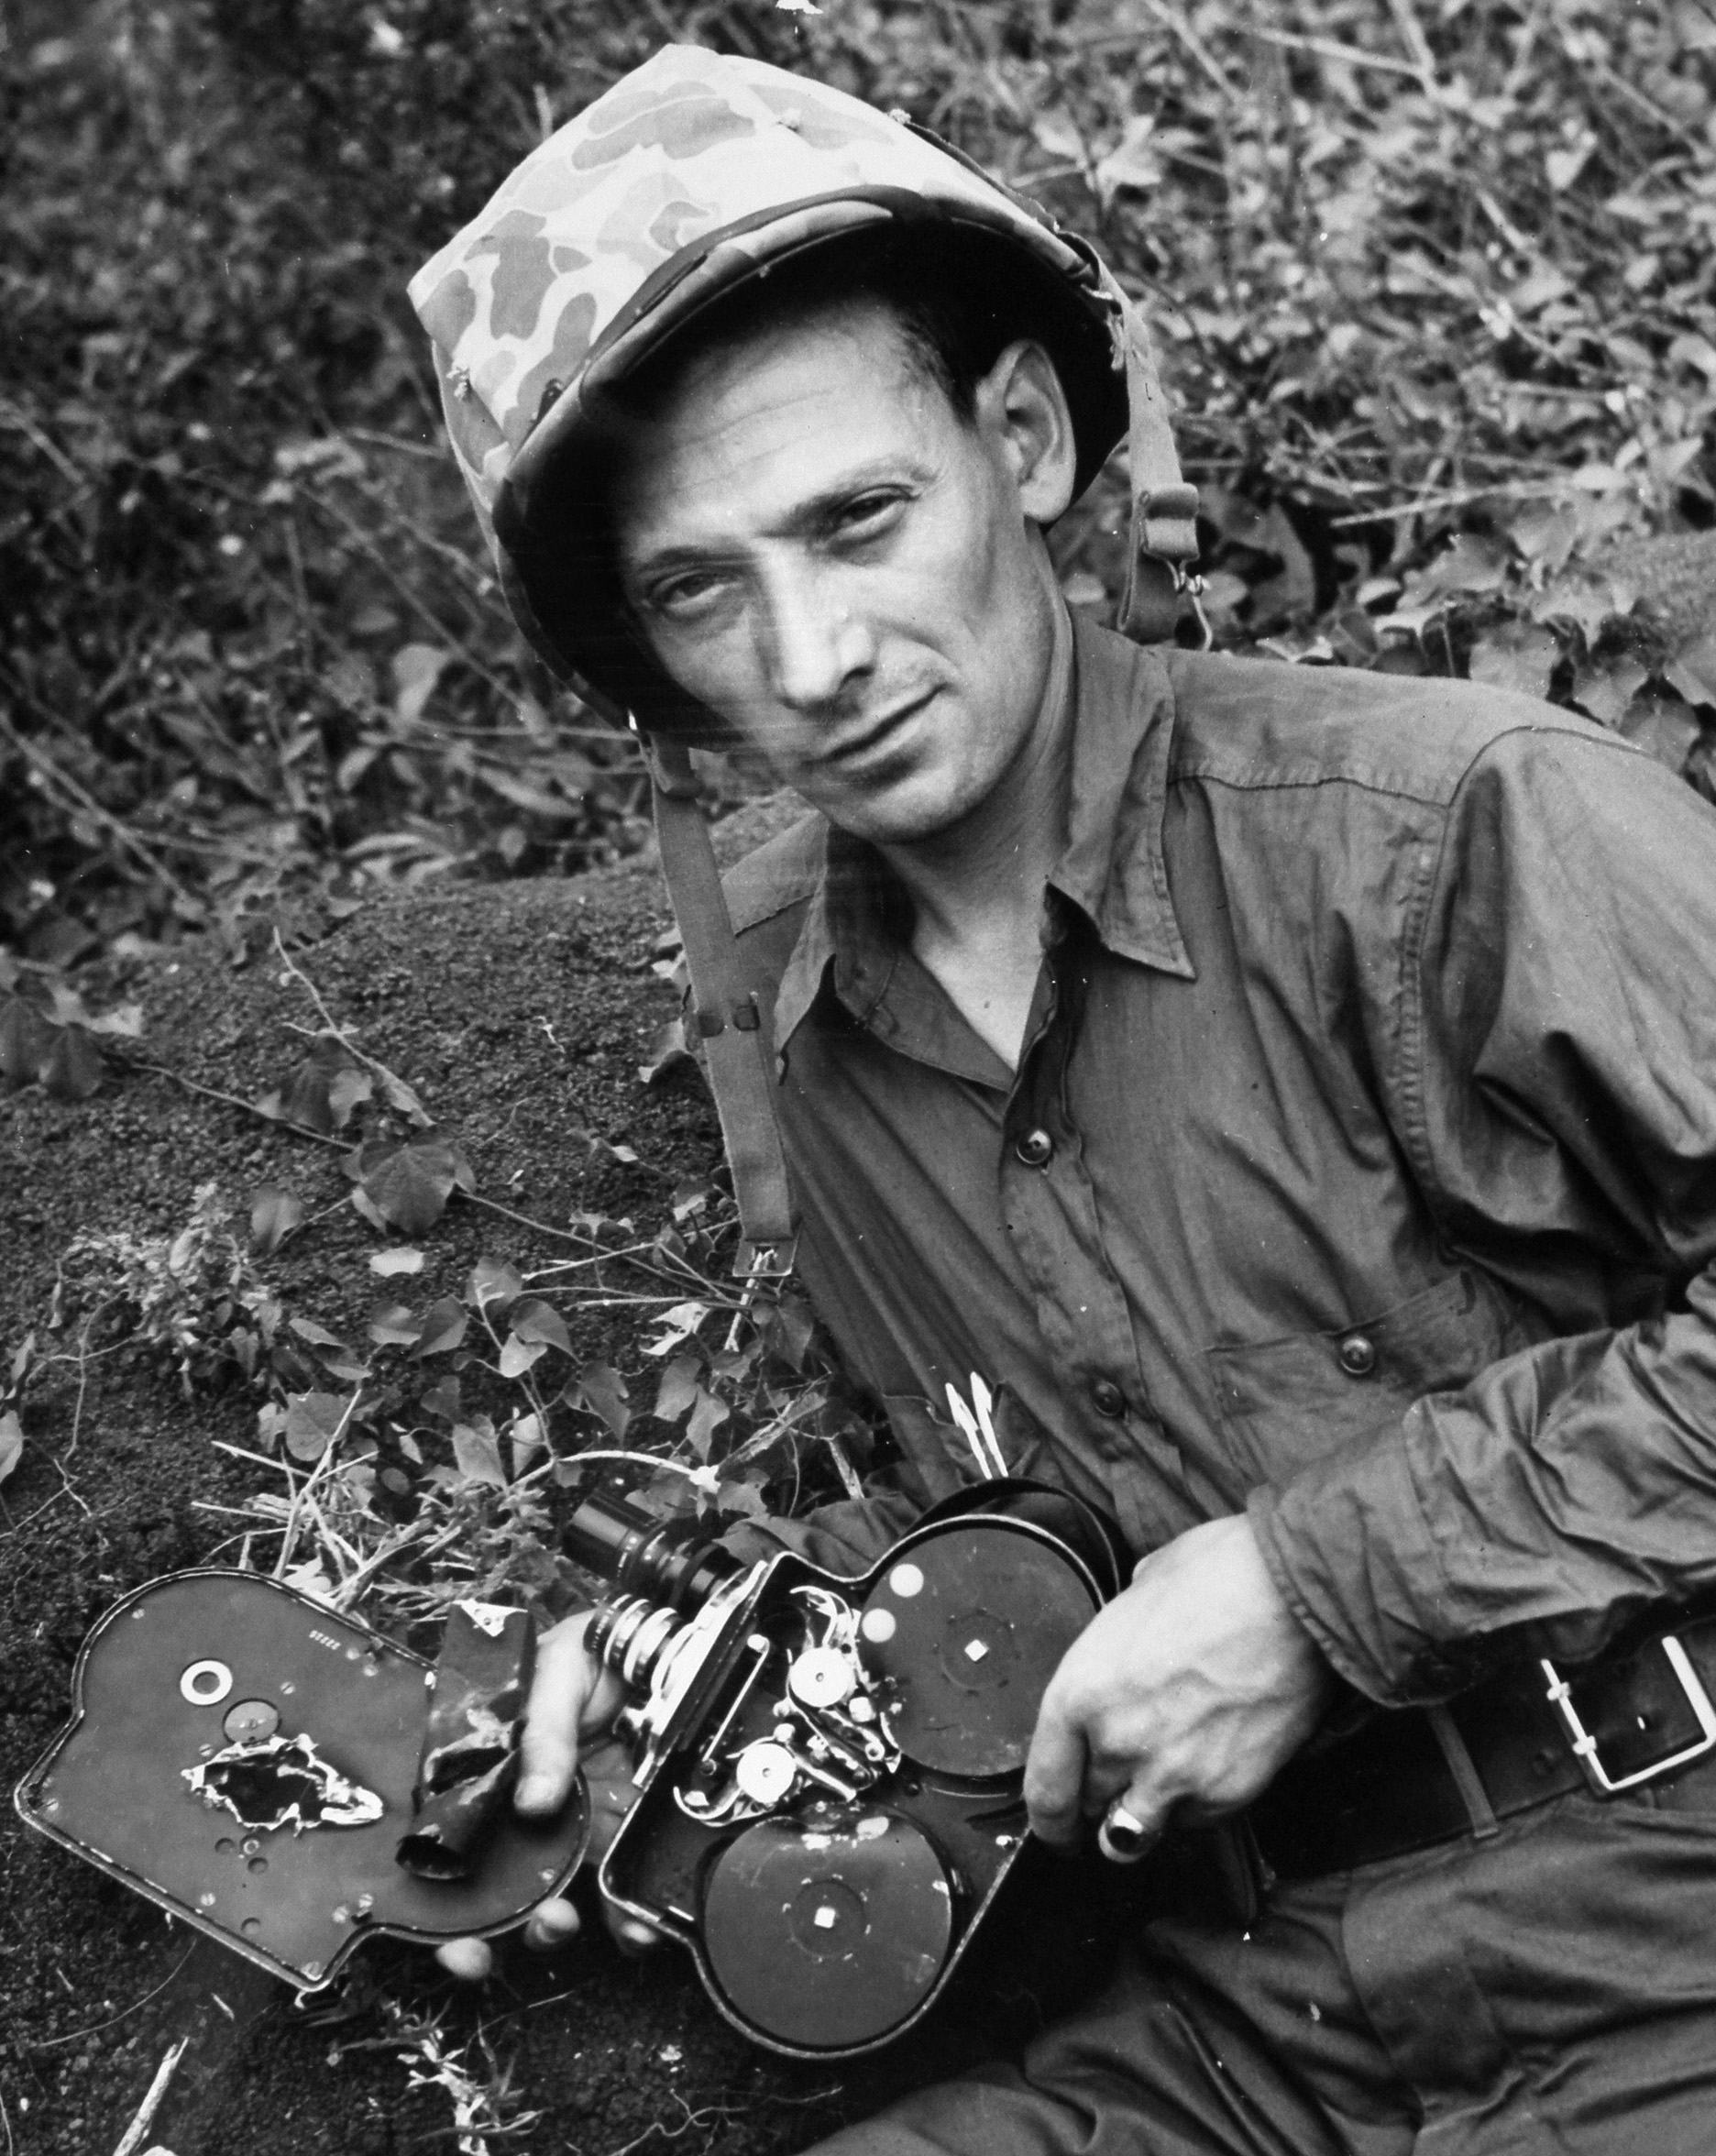 Coast Guard cinematographer Charles W. Bossert shows off the damage to his Bell & Howell Eyemo 35mm movie camera caused by shrapnel from a Japanese mortar on Iwo Jima. Many combat photographers were killed or wounded while trying to get “the shot” and visually document the war.